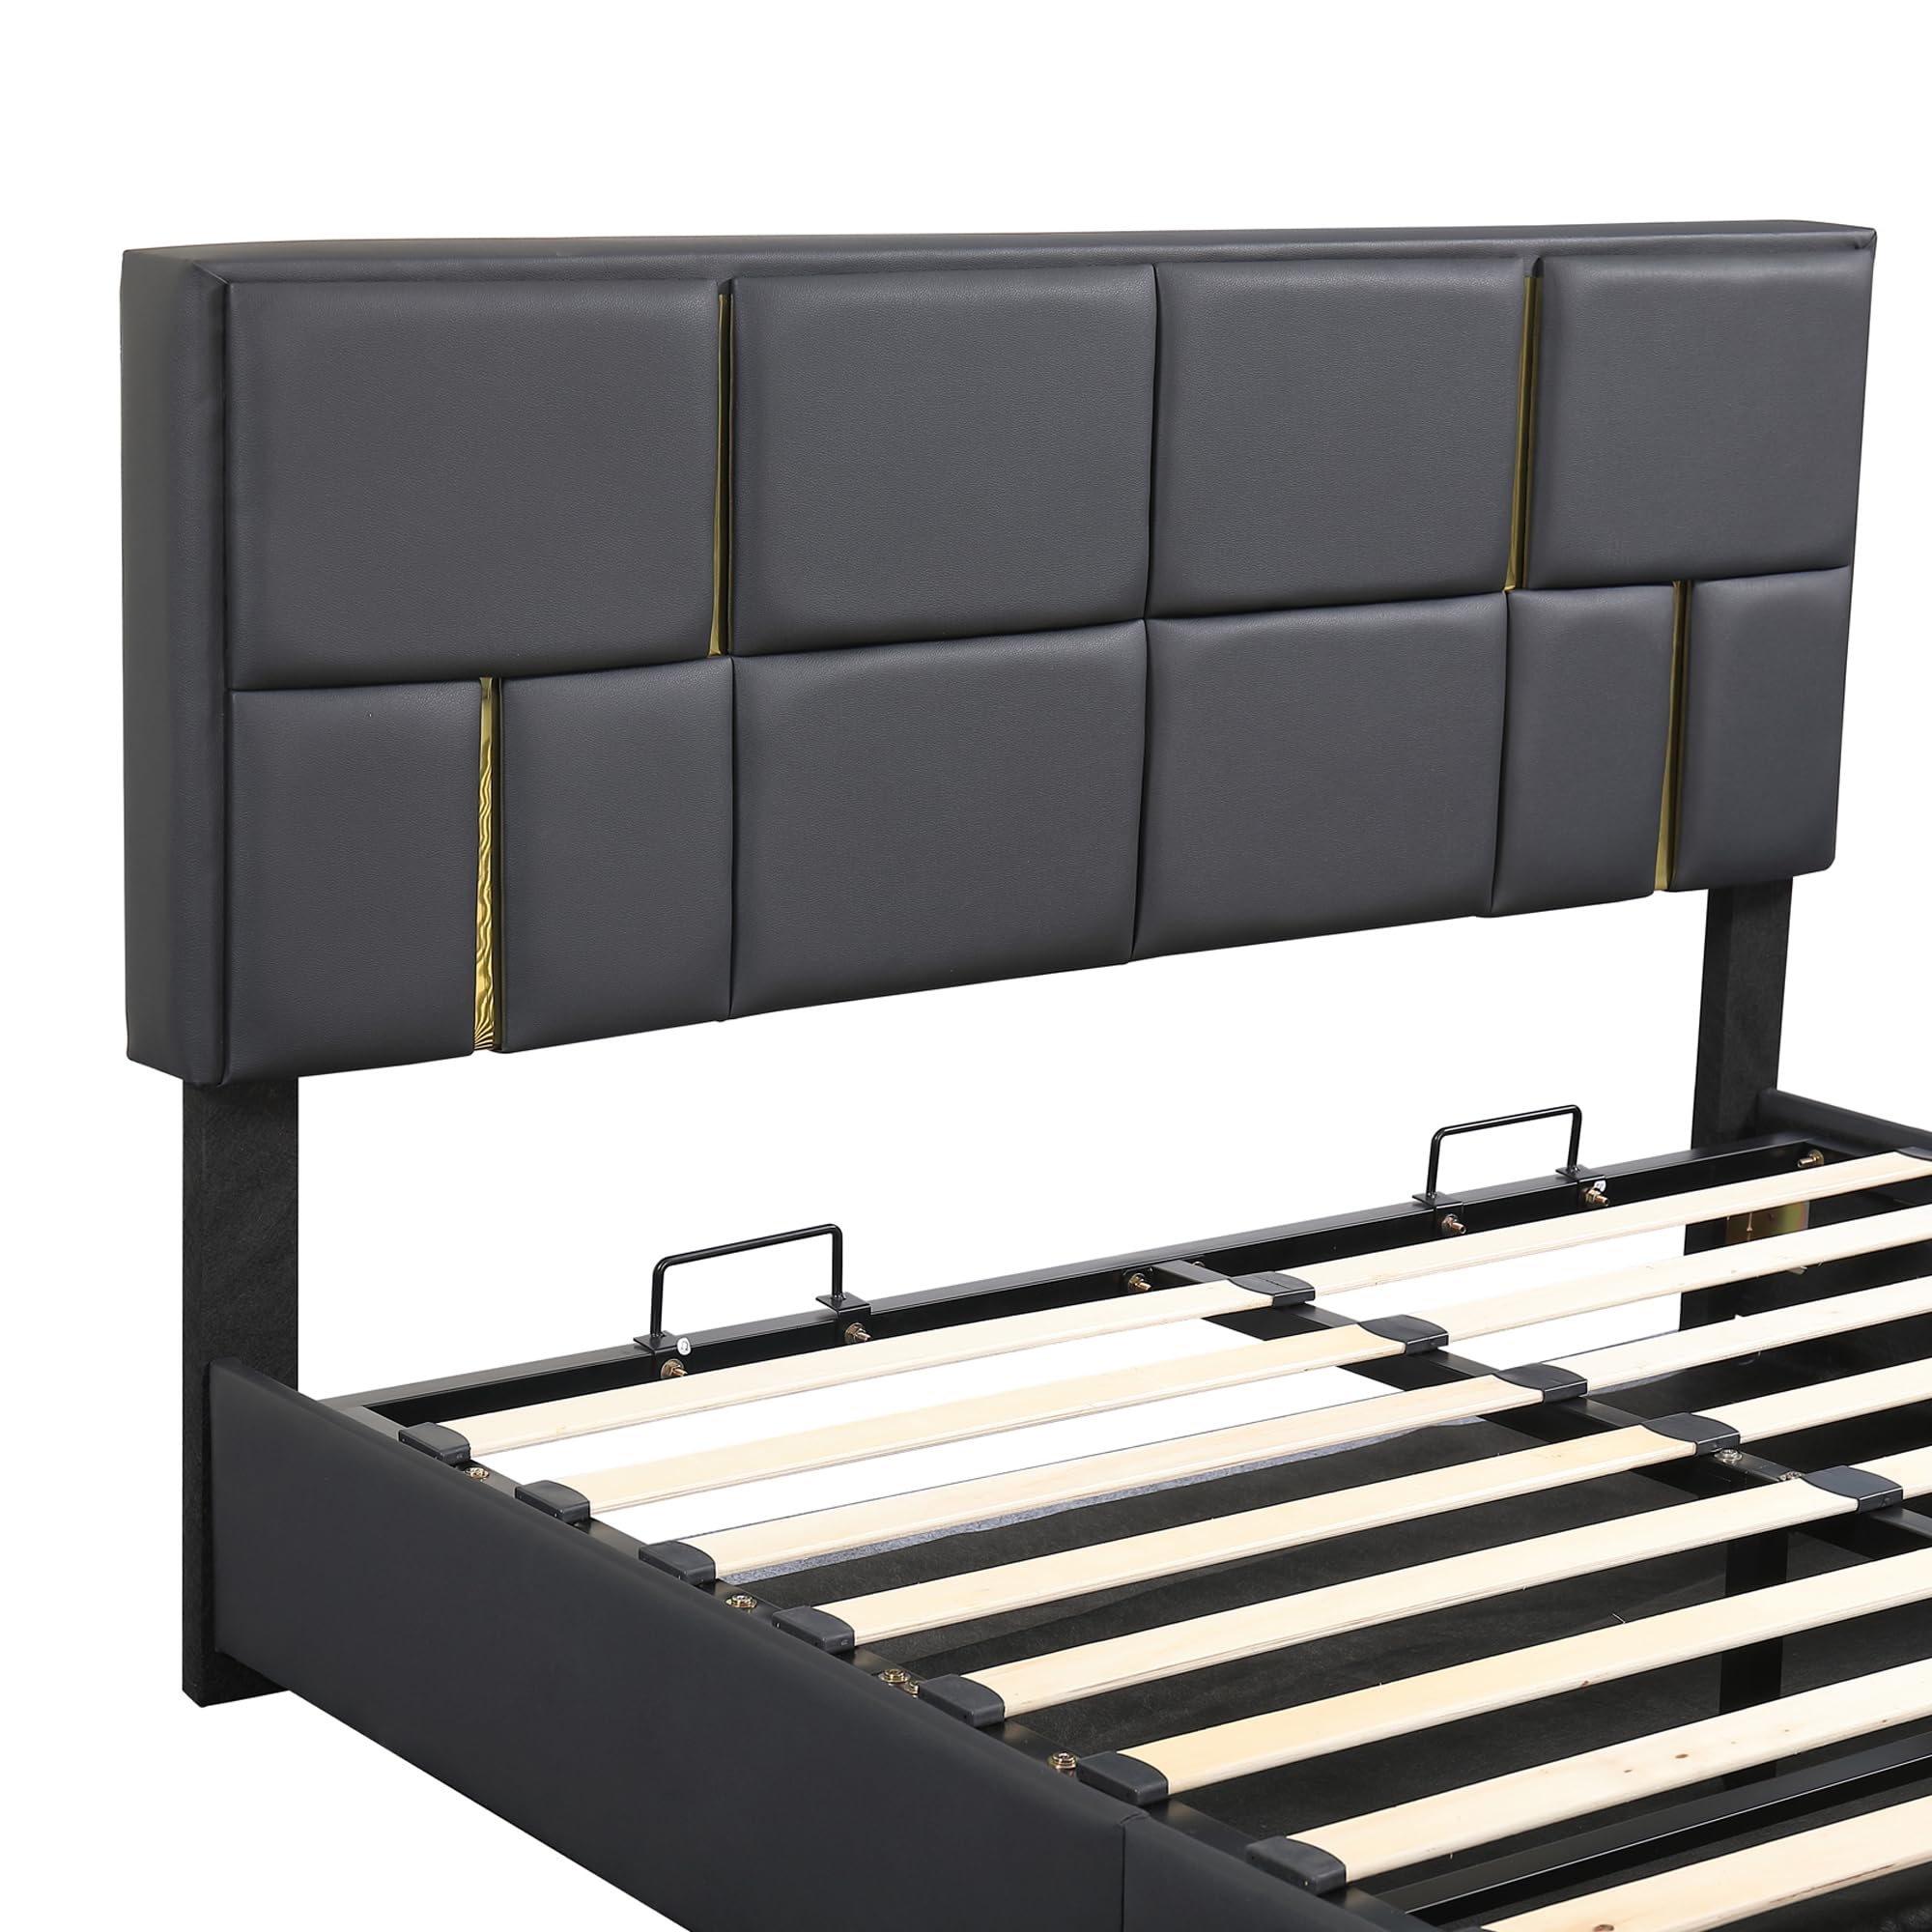 VilroCaz Queen Size Upholstered Platform Bed with Hydraulic Storage System, PU Upholstered Platform Bed with Gold Decoration Headboard, No Box Spring Needed (Black-M/PU)